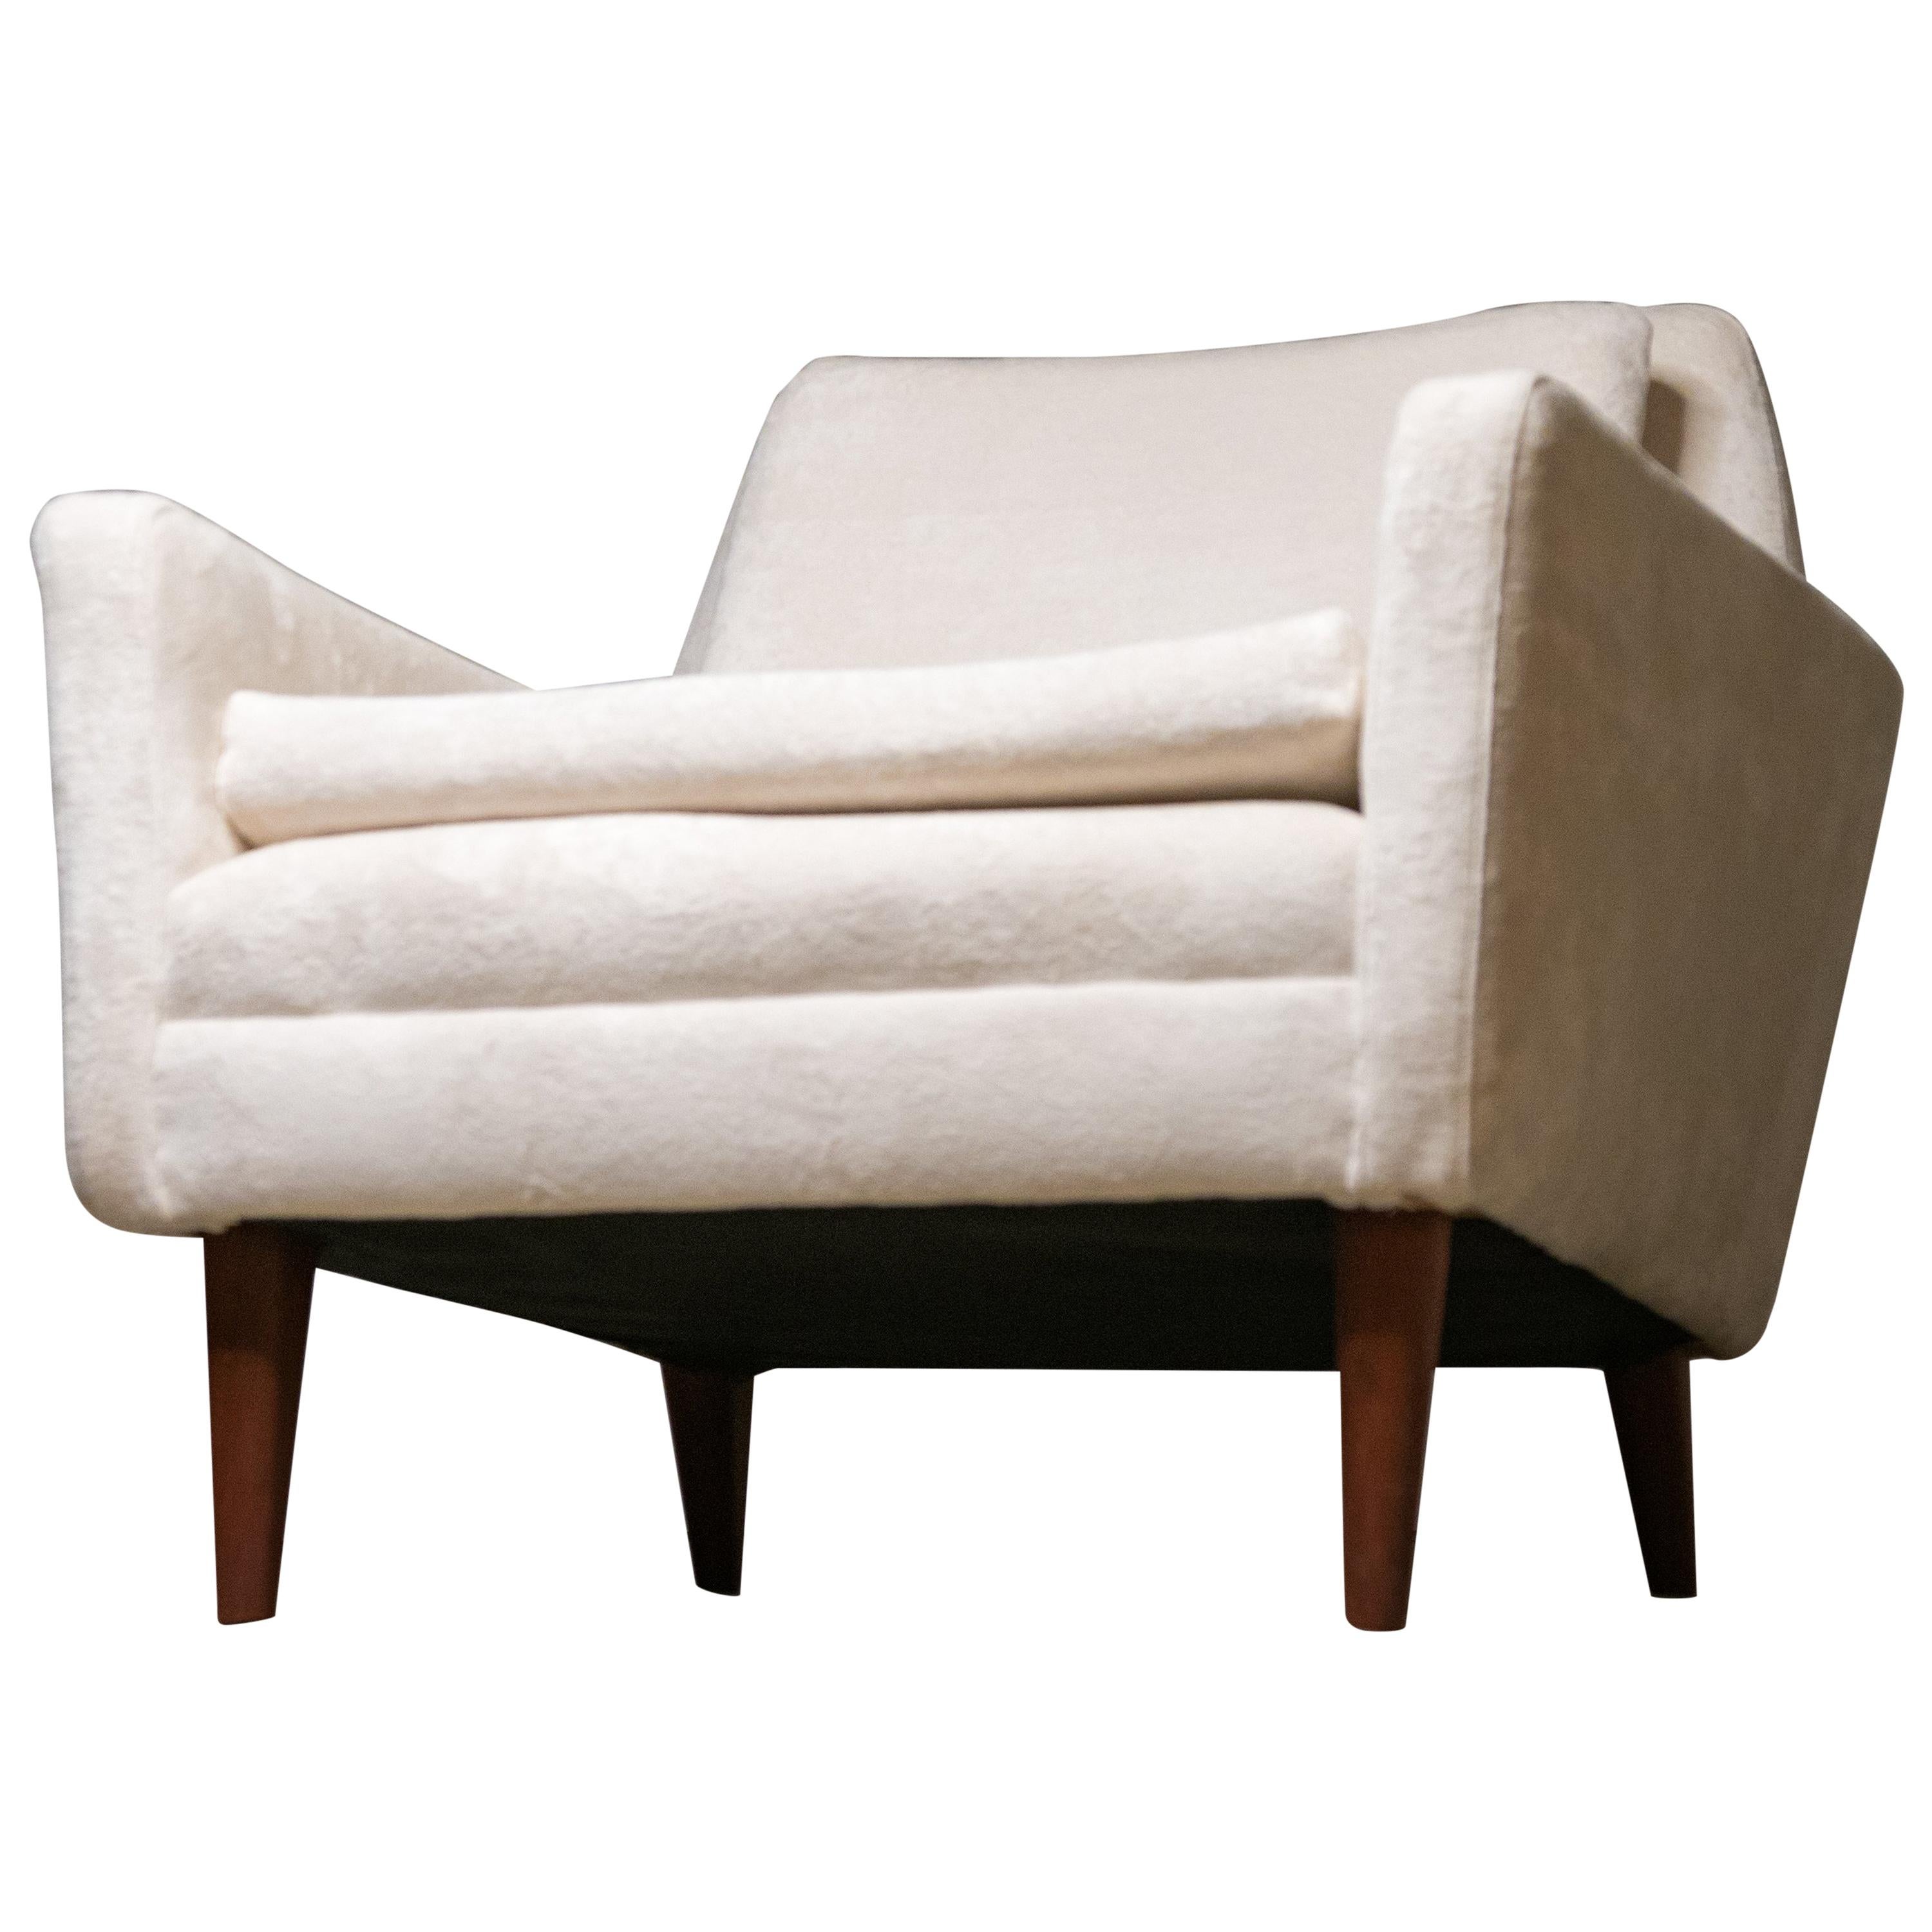 Designer: DUX
Manufacture: DUX
Period/style: Mid-Century Modern 
Country: Denmark
Date: 1960s.